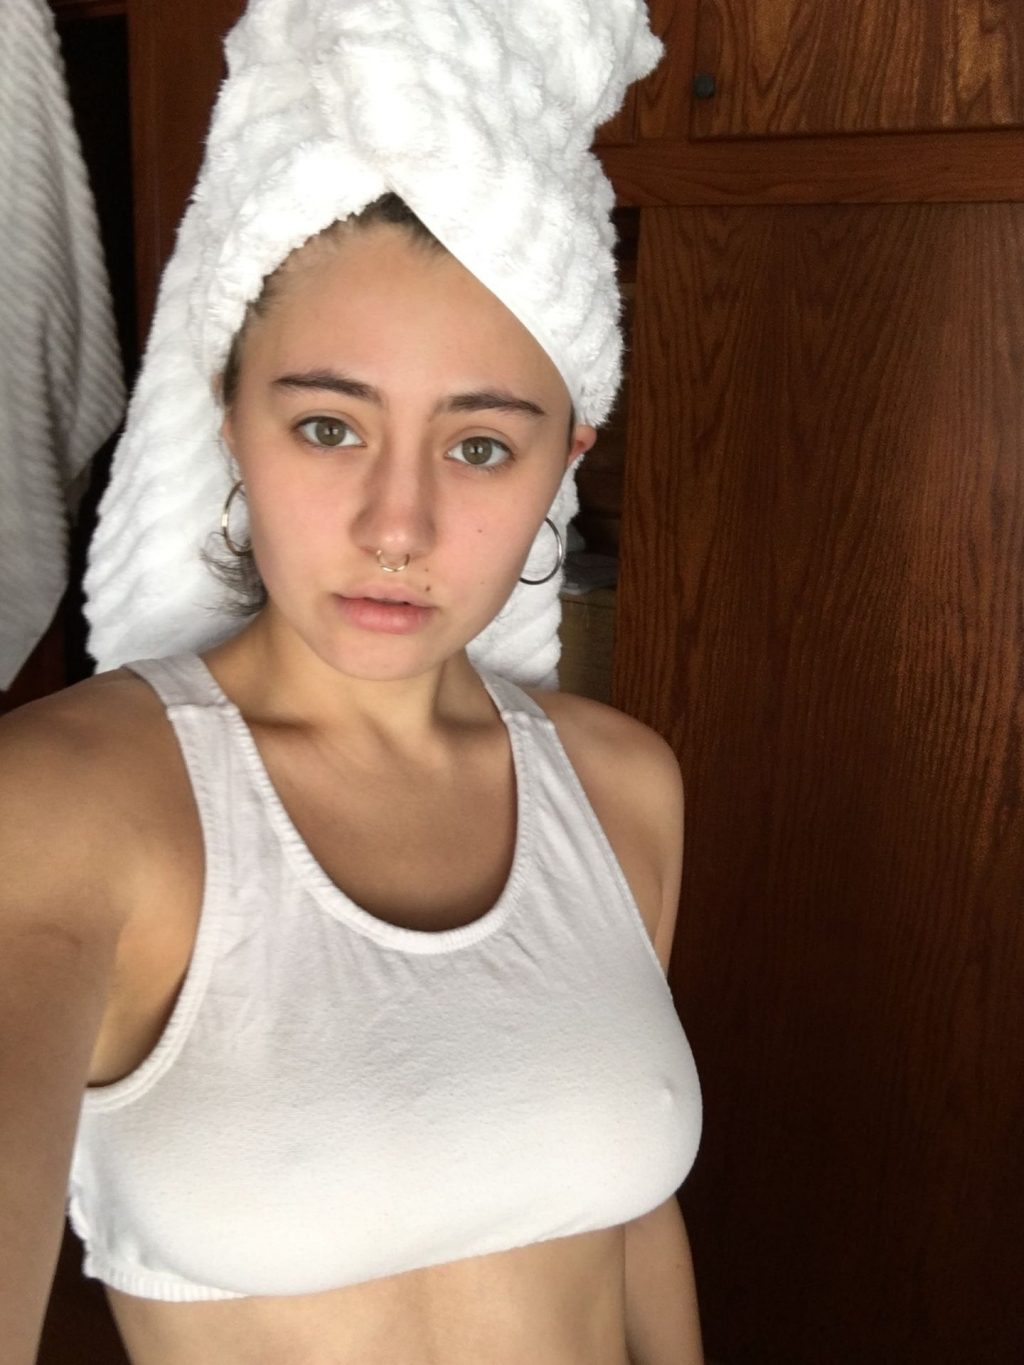 Lia Marie Johnson nude – The Fappening. 2014-2022 celebrity photo leaks!